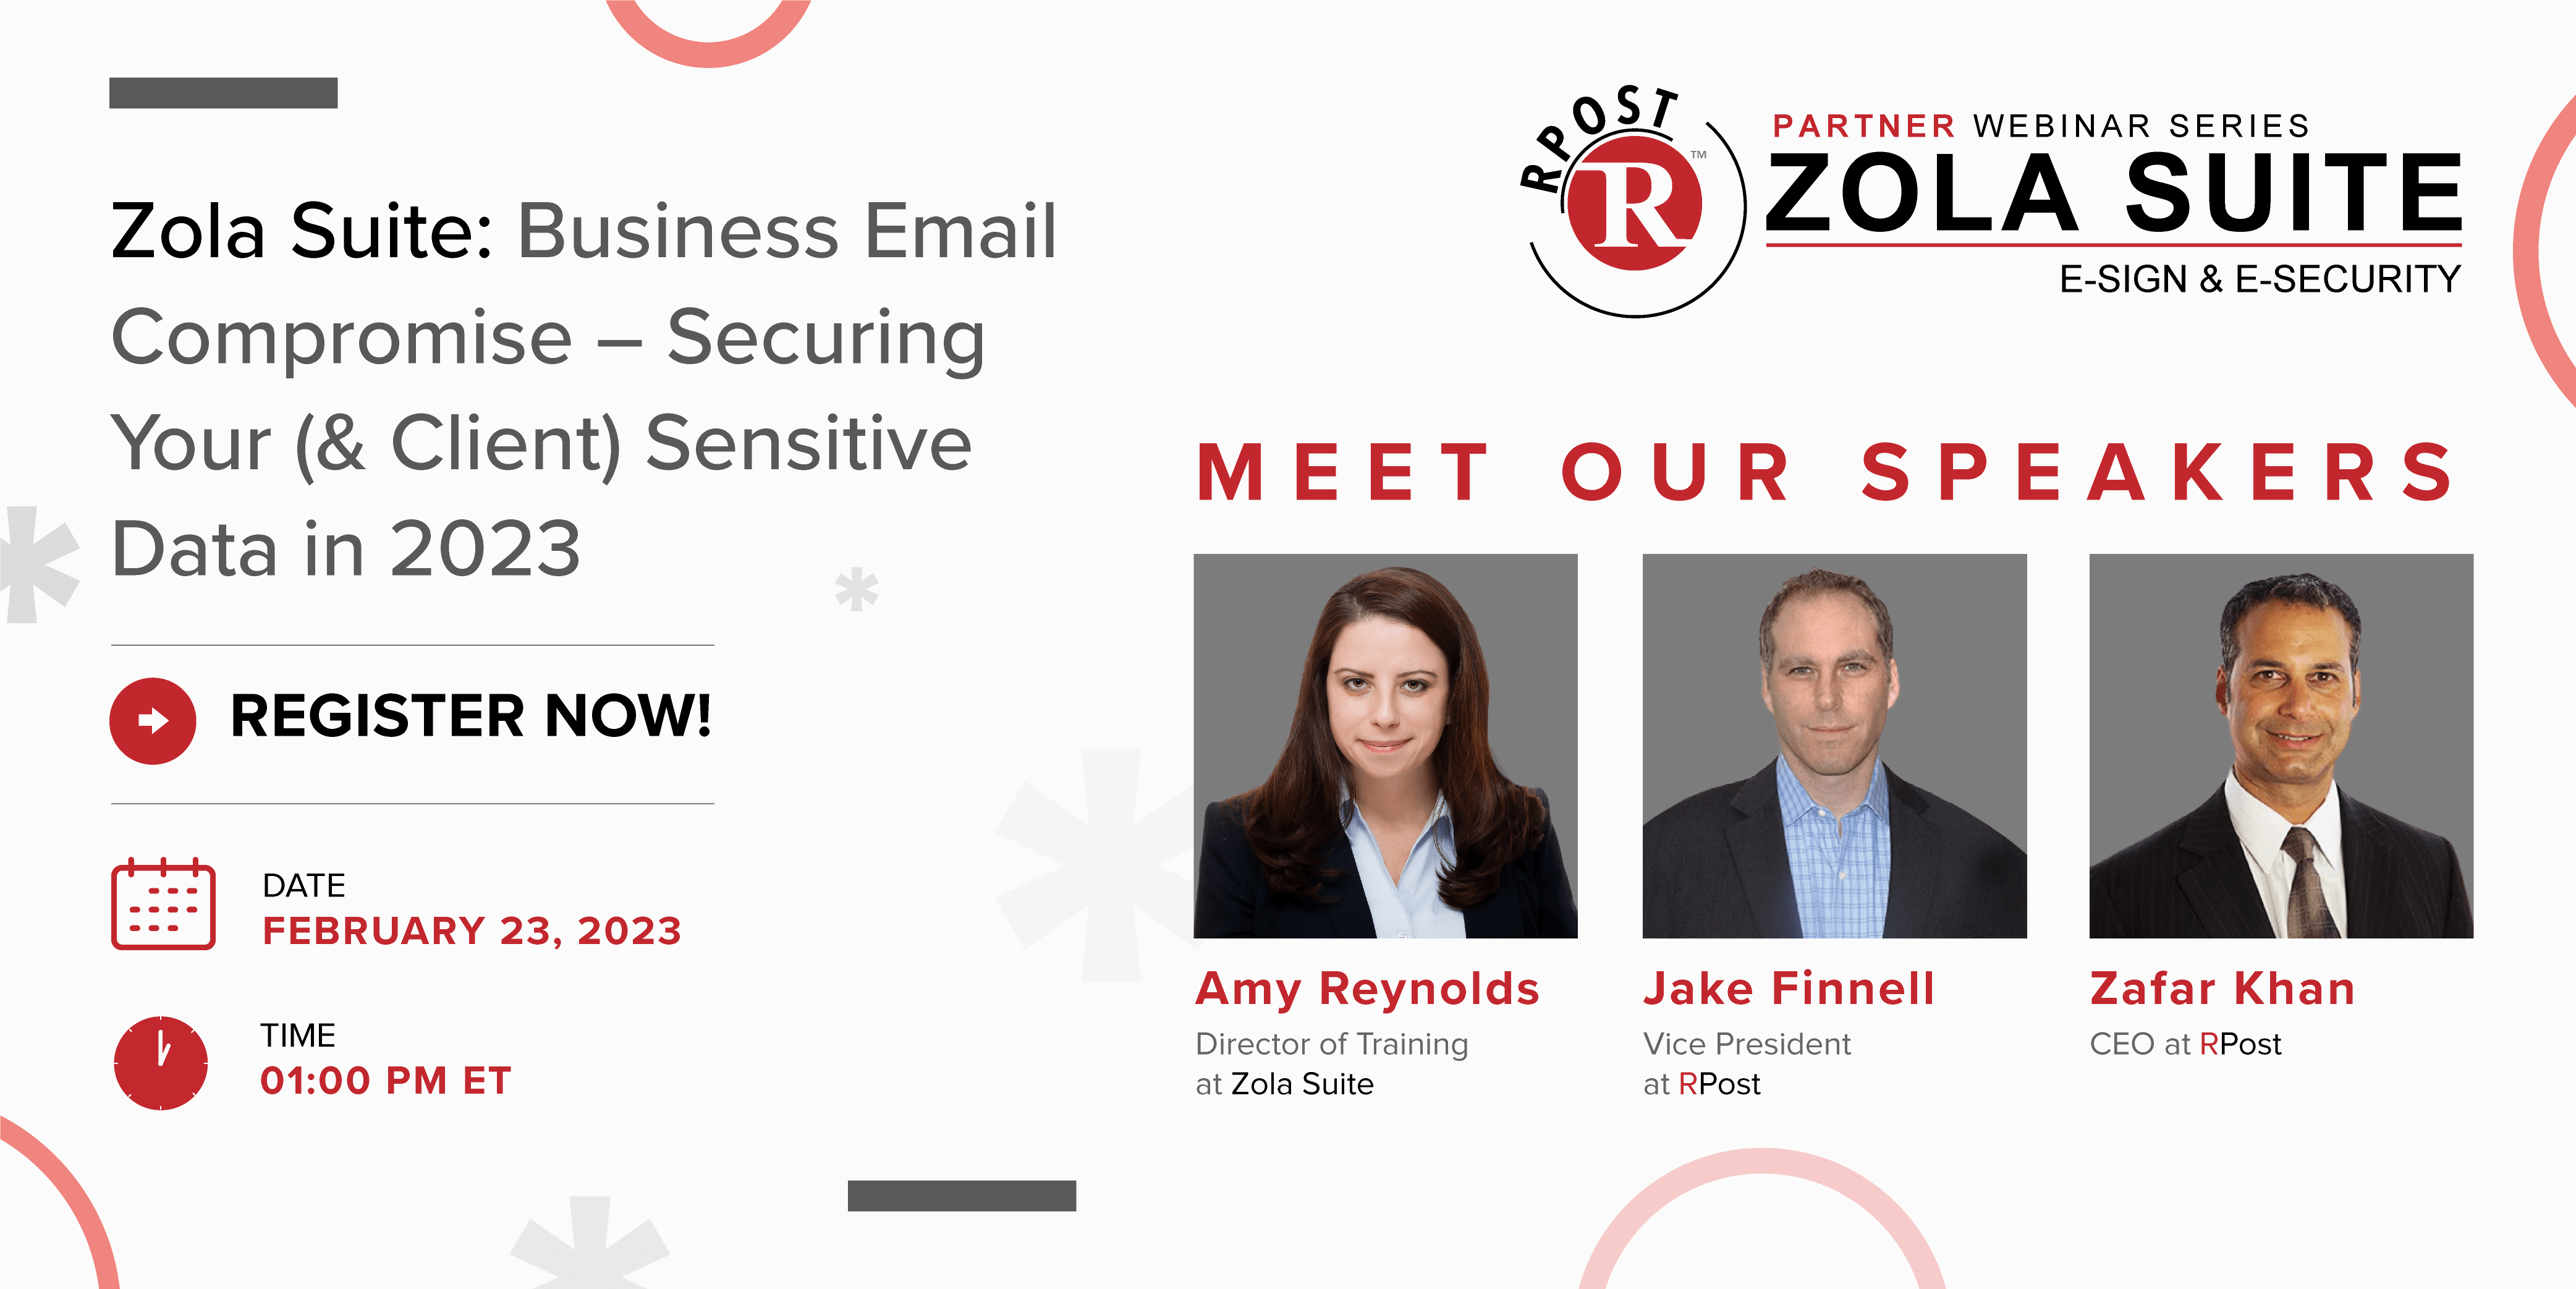 Zola Suite: Business Email Compromise – Securing Your (& Client) Sensitive Data in 2023